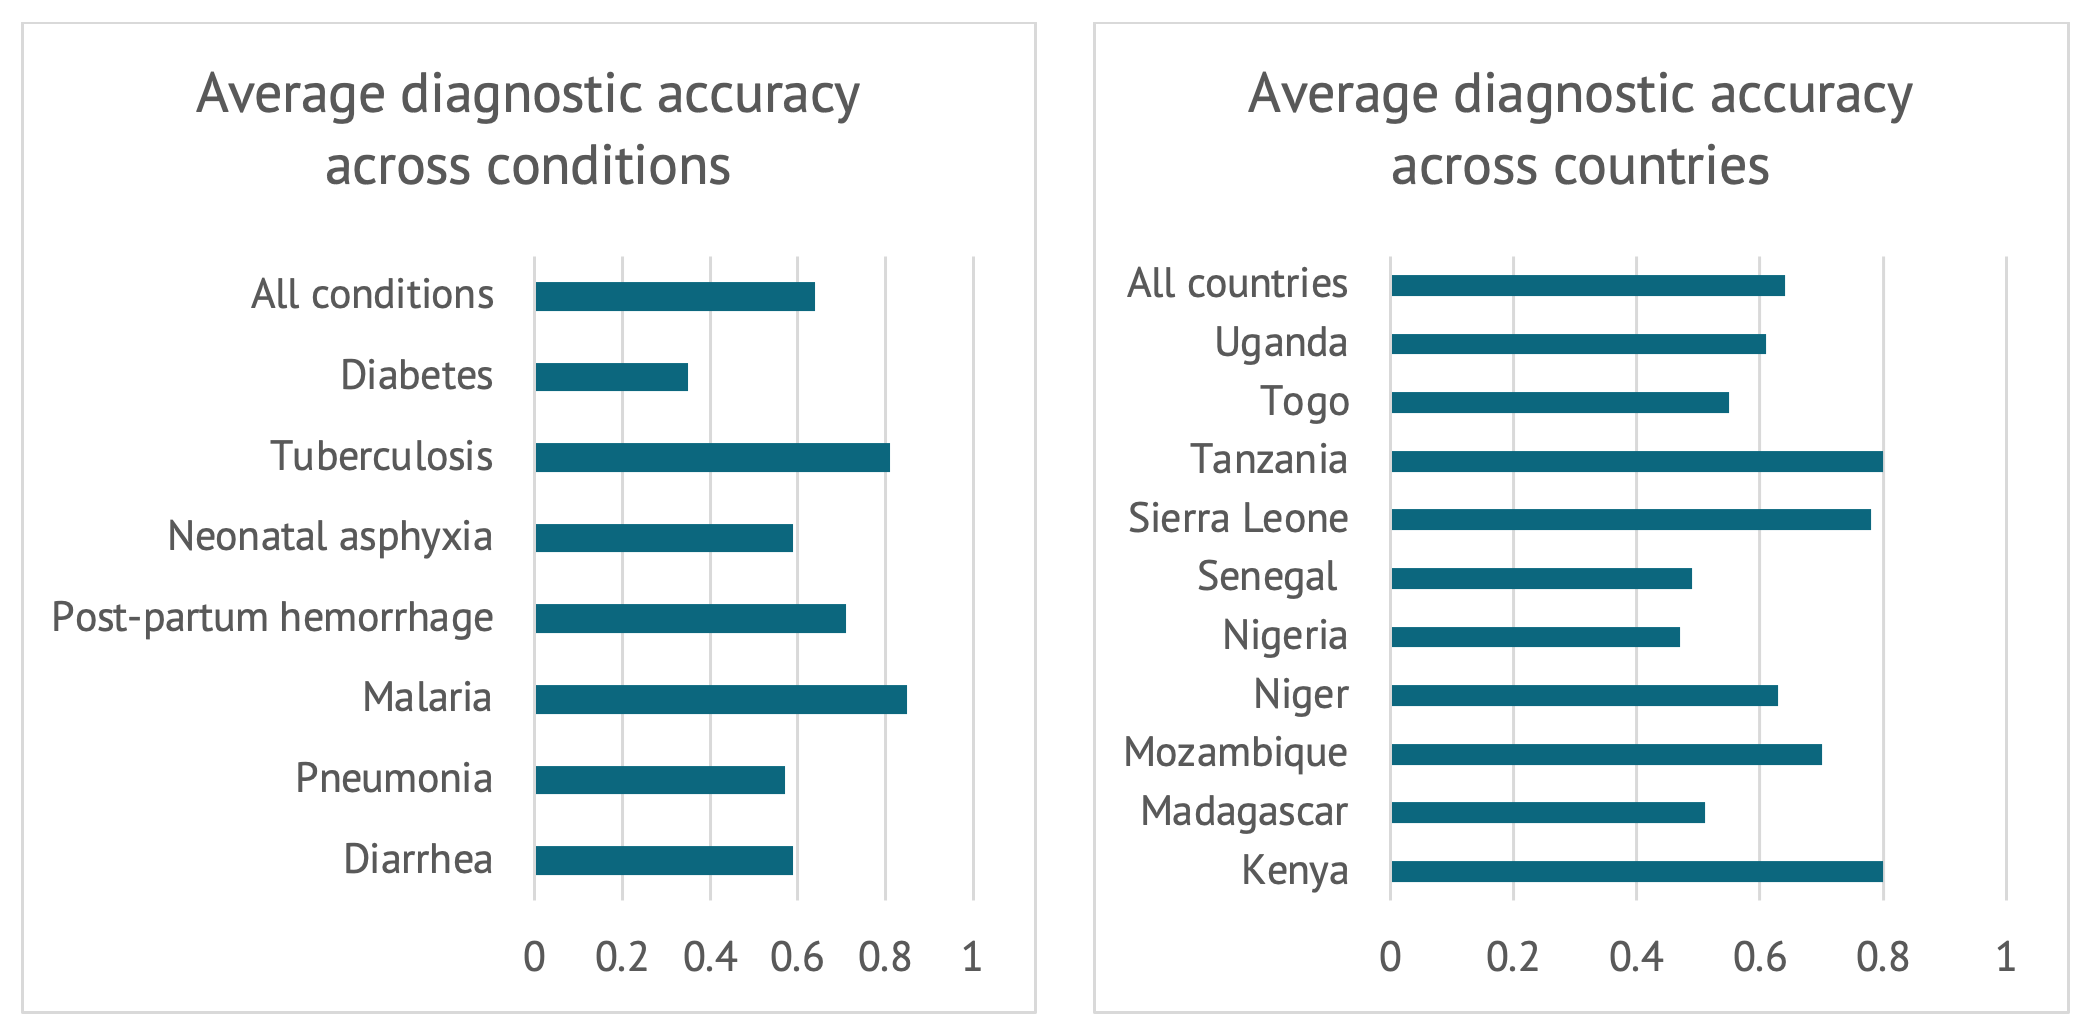 Figure showing average diagnostic accuracy across countries and conditions. Diabetes is lowest, around .3, and malaria is highest at over .8. Tanzania and Kenya are tops at .8 and Nigeria is lowest at about .5